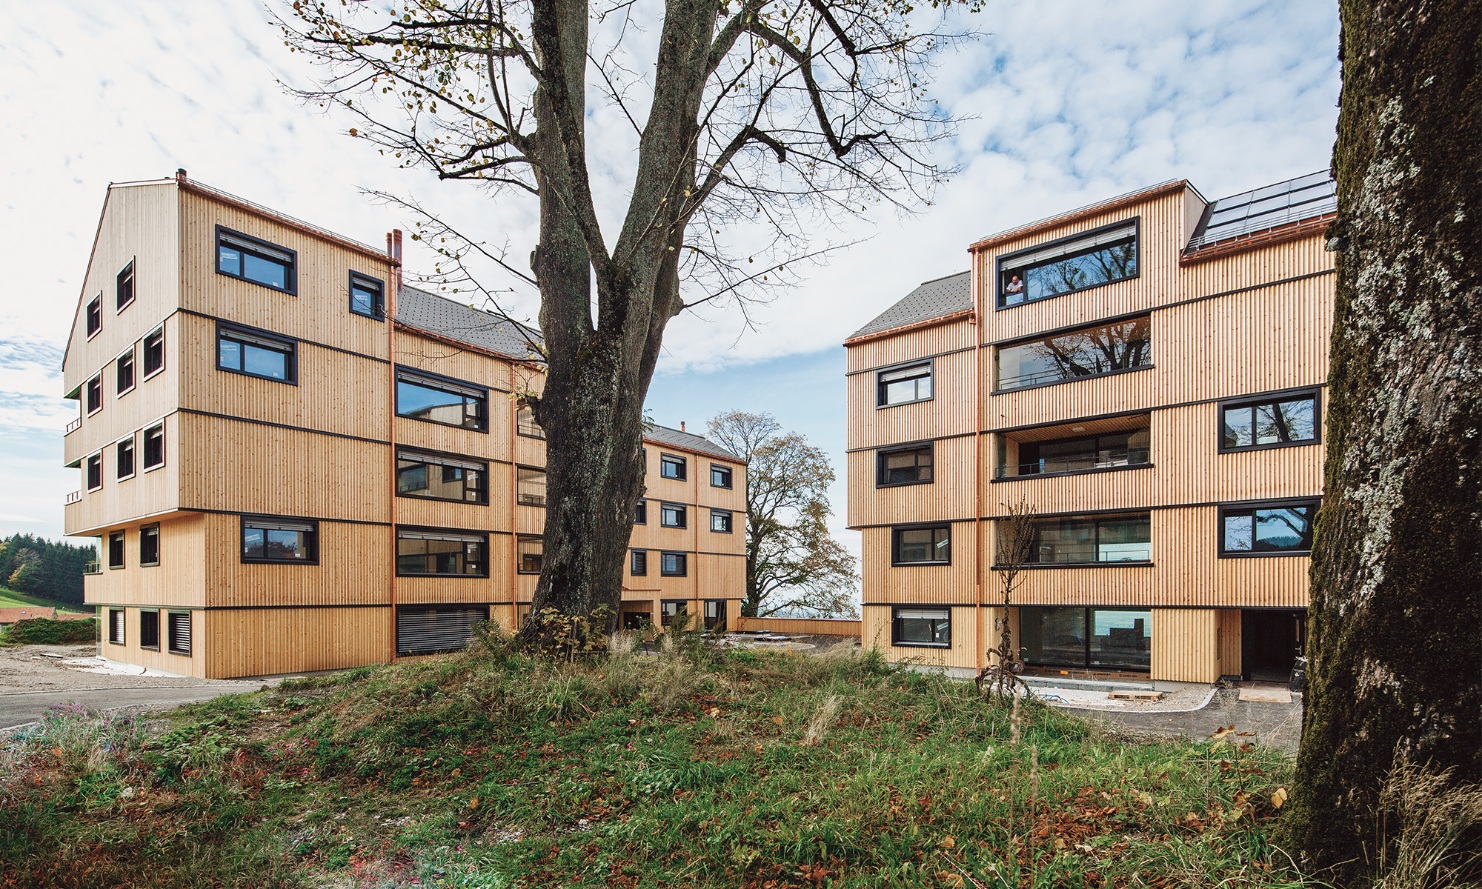 View of the multi-story timber construction in Vögelinsegg, Speicher, with a Swiss timber facade